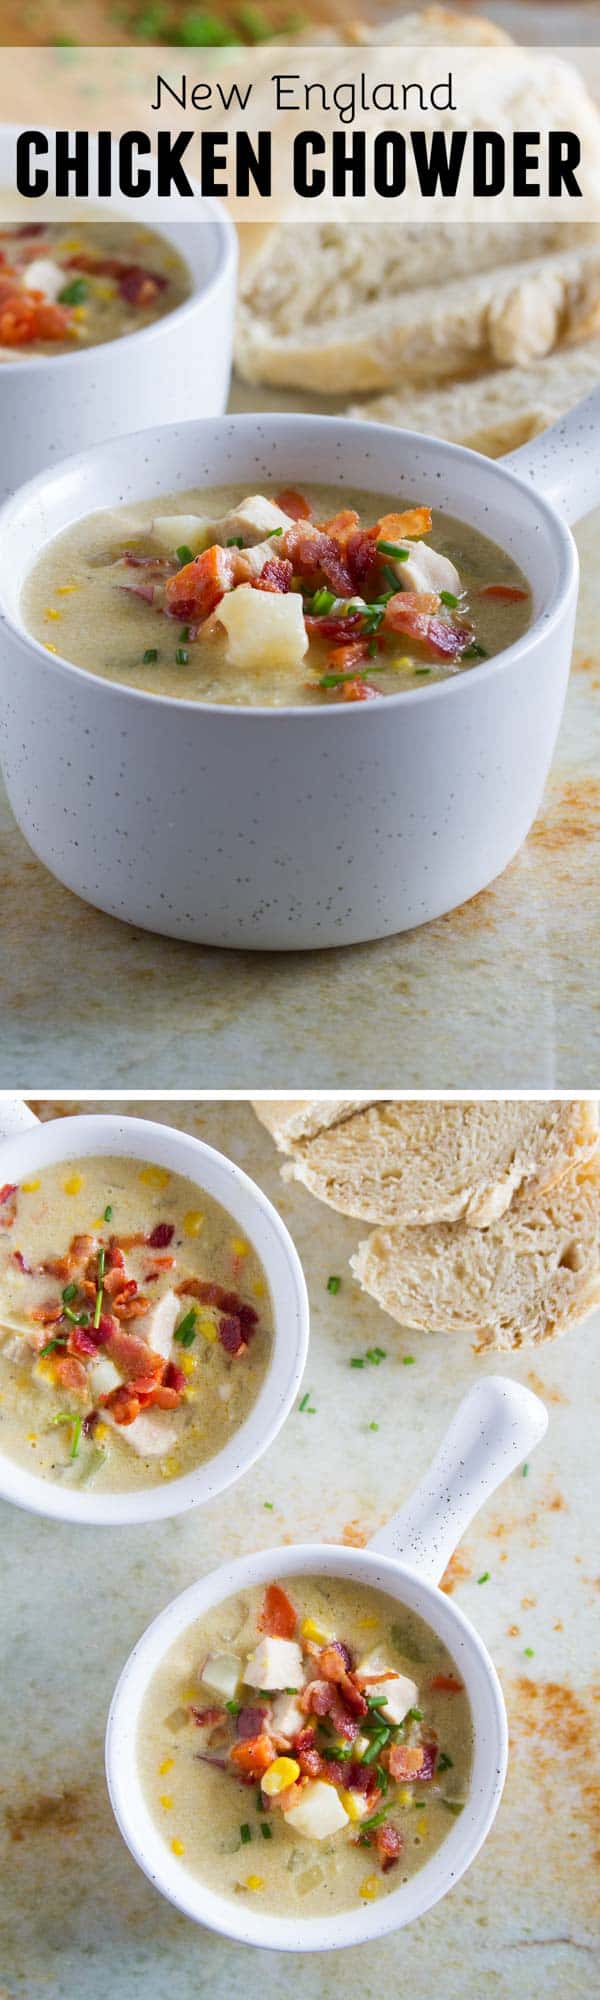 You’ve all had clam chowder, but what about this New England Chicken Chowder recipe? It combines your favorite New England chowder flavors like potatoes and bacon, but adds in crowd pleasing chicken. This chicken chowder recipe is creamy and comforting!